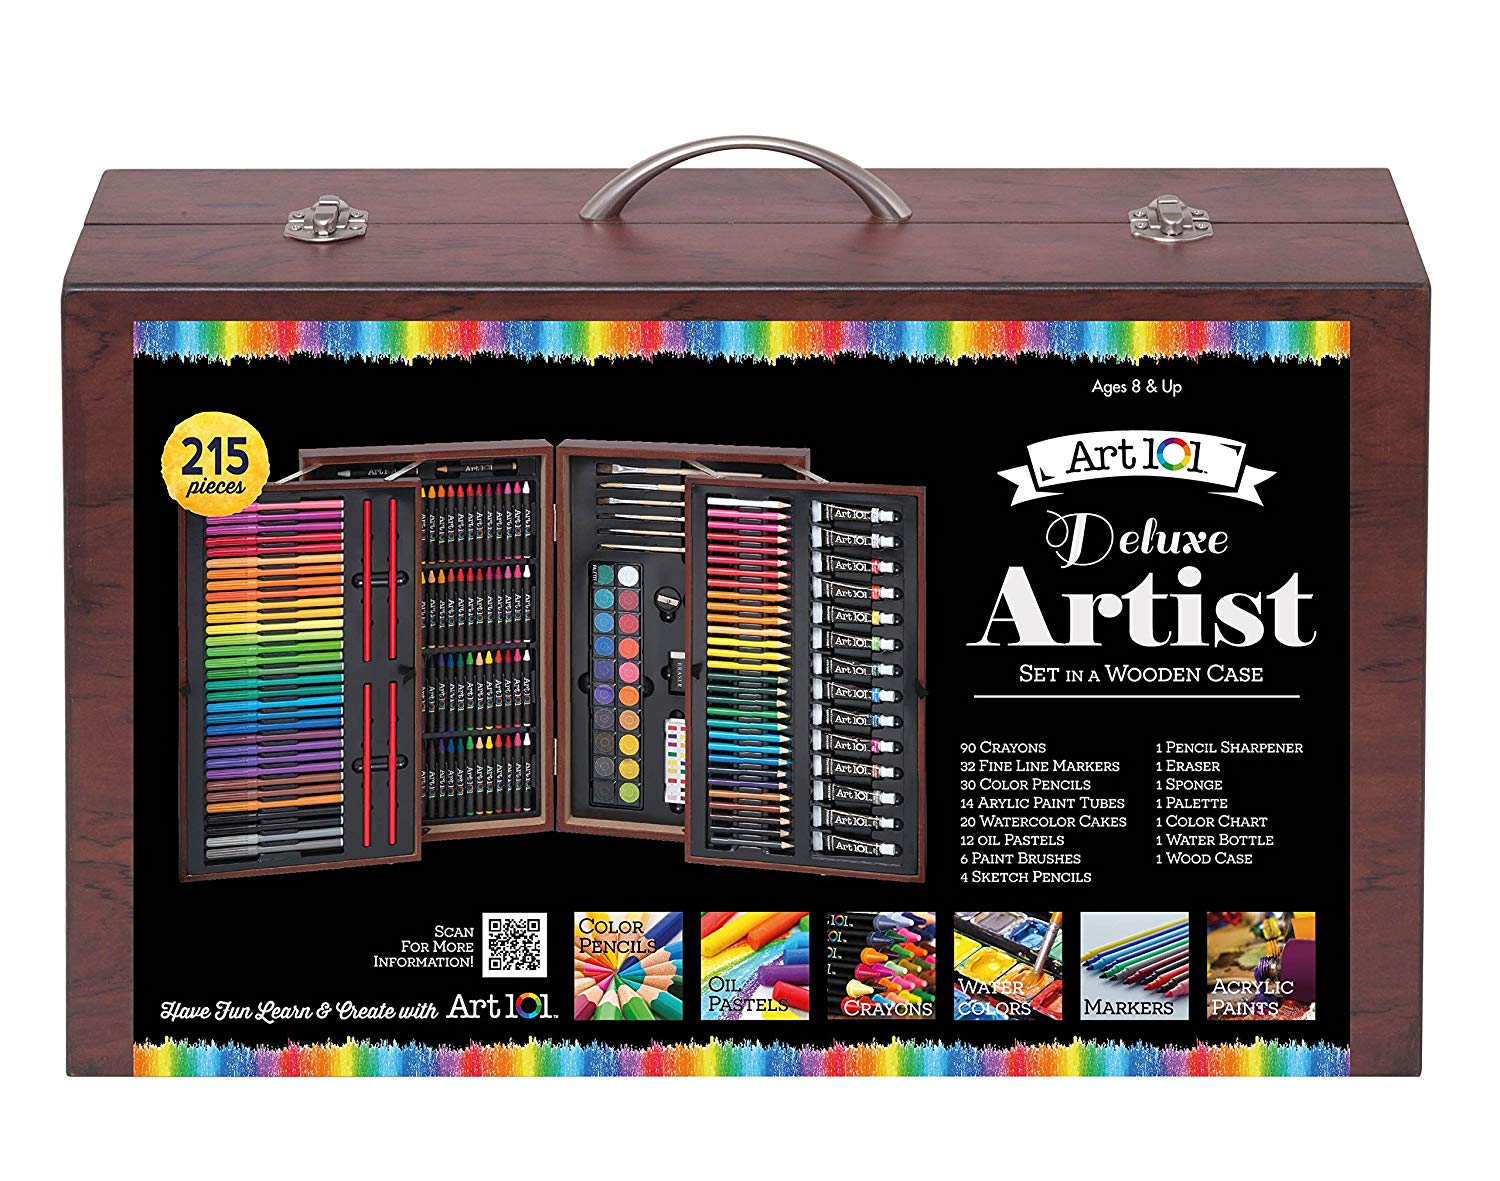 5 Best Watercolor Painting Kits for Adults - The Art Suppliers